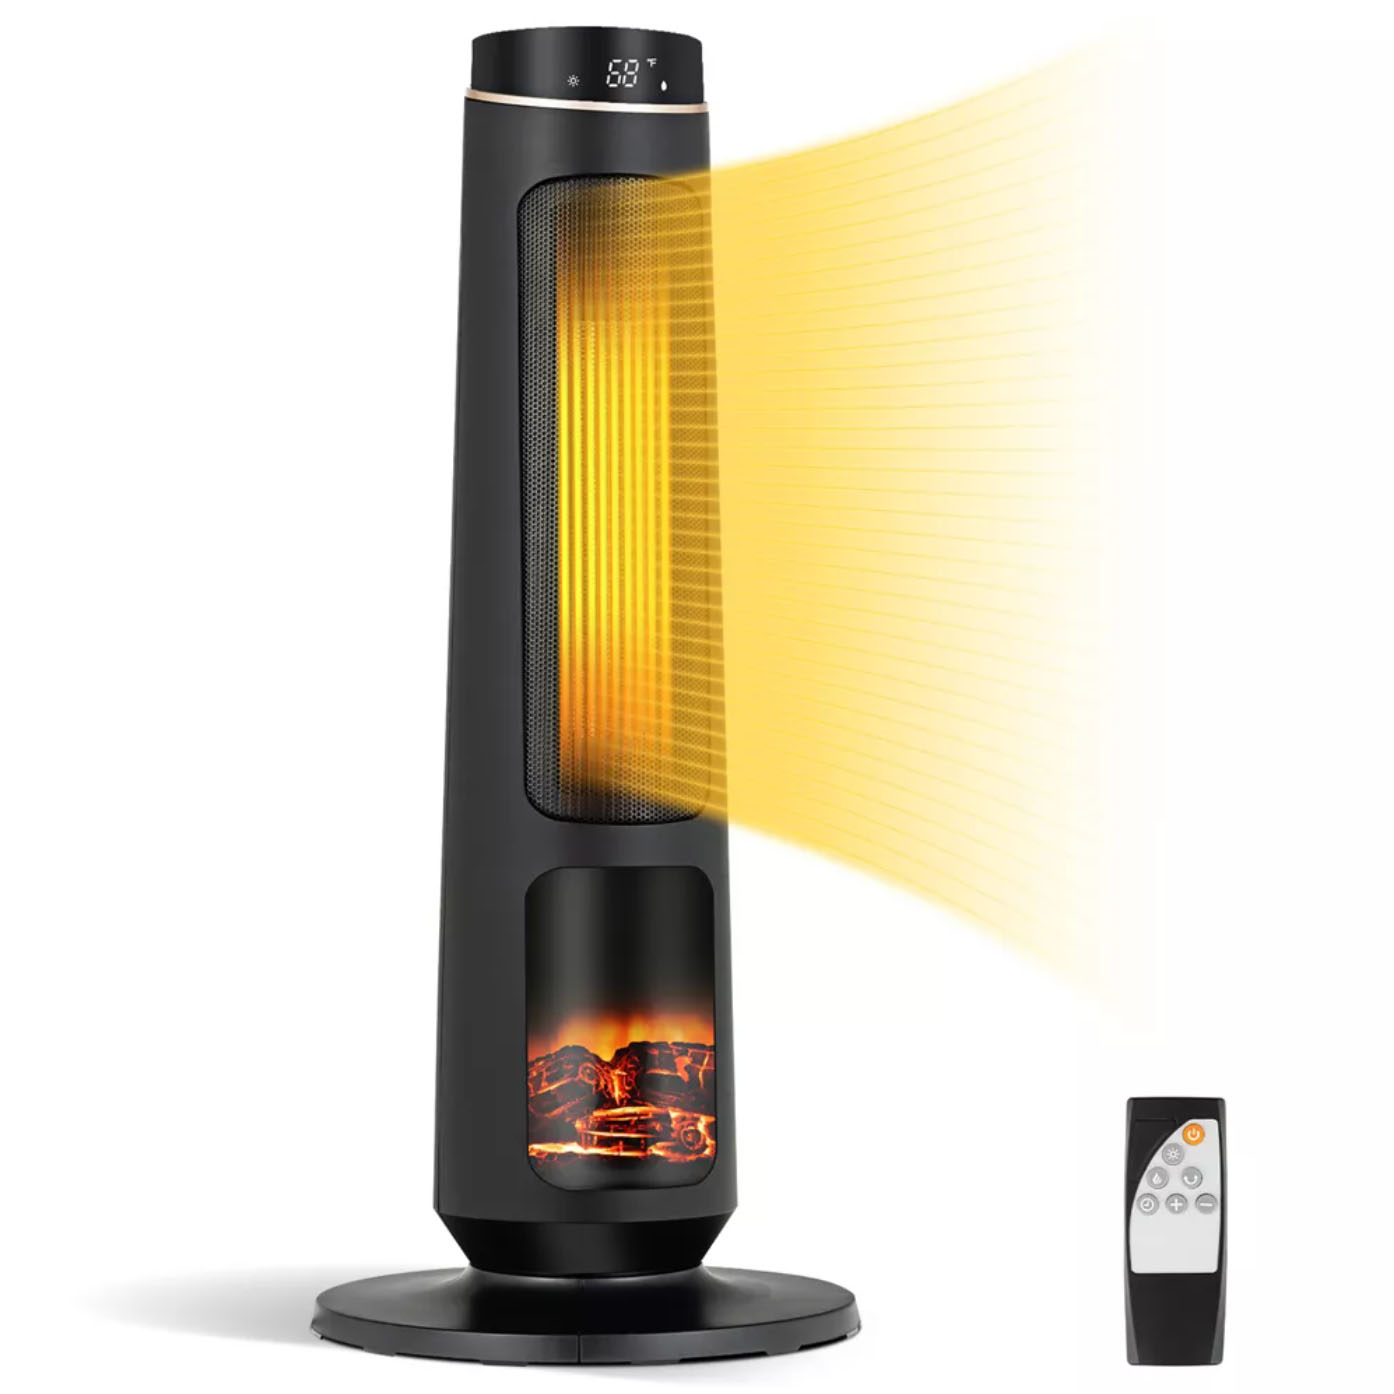 Black cylinder heater with 3D flame effect and remote